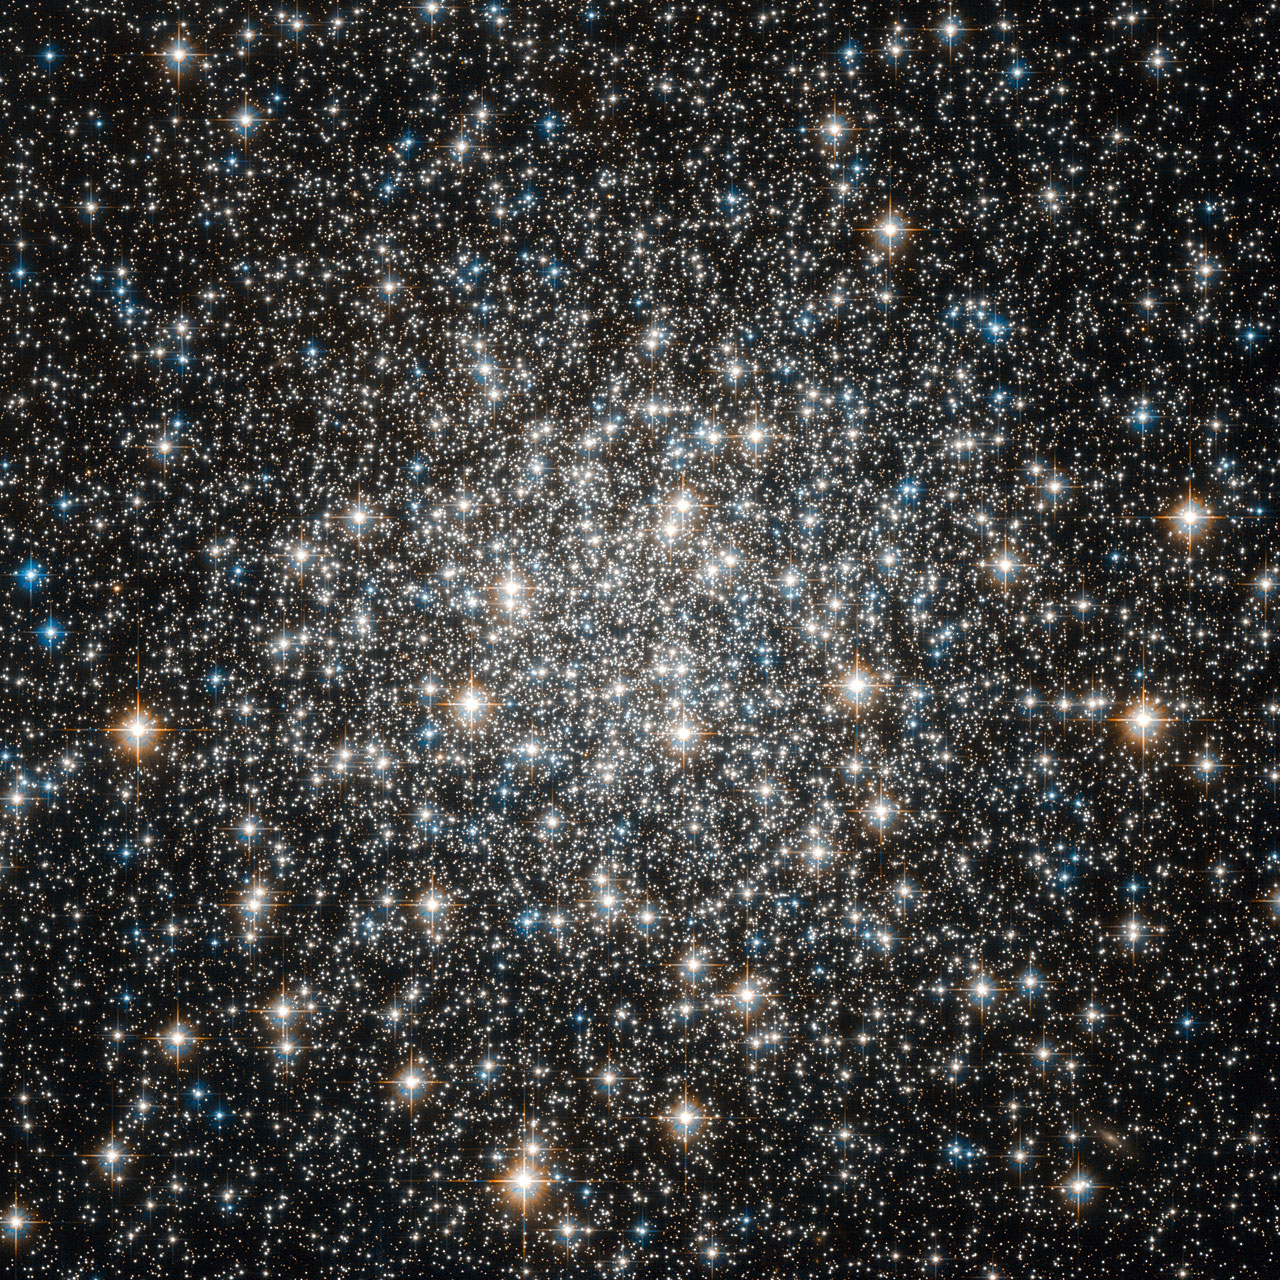 hubble space telescope image of the heart of the star cluster M10